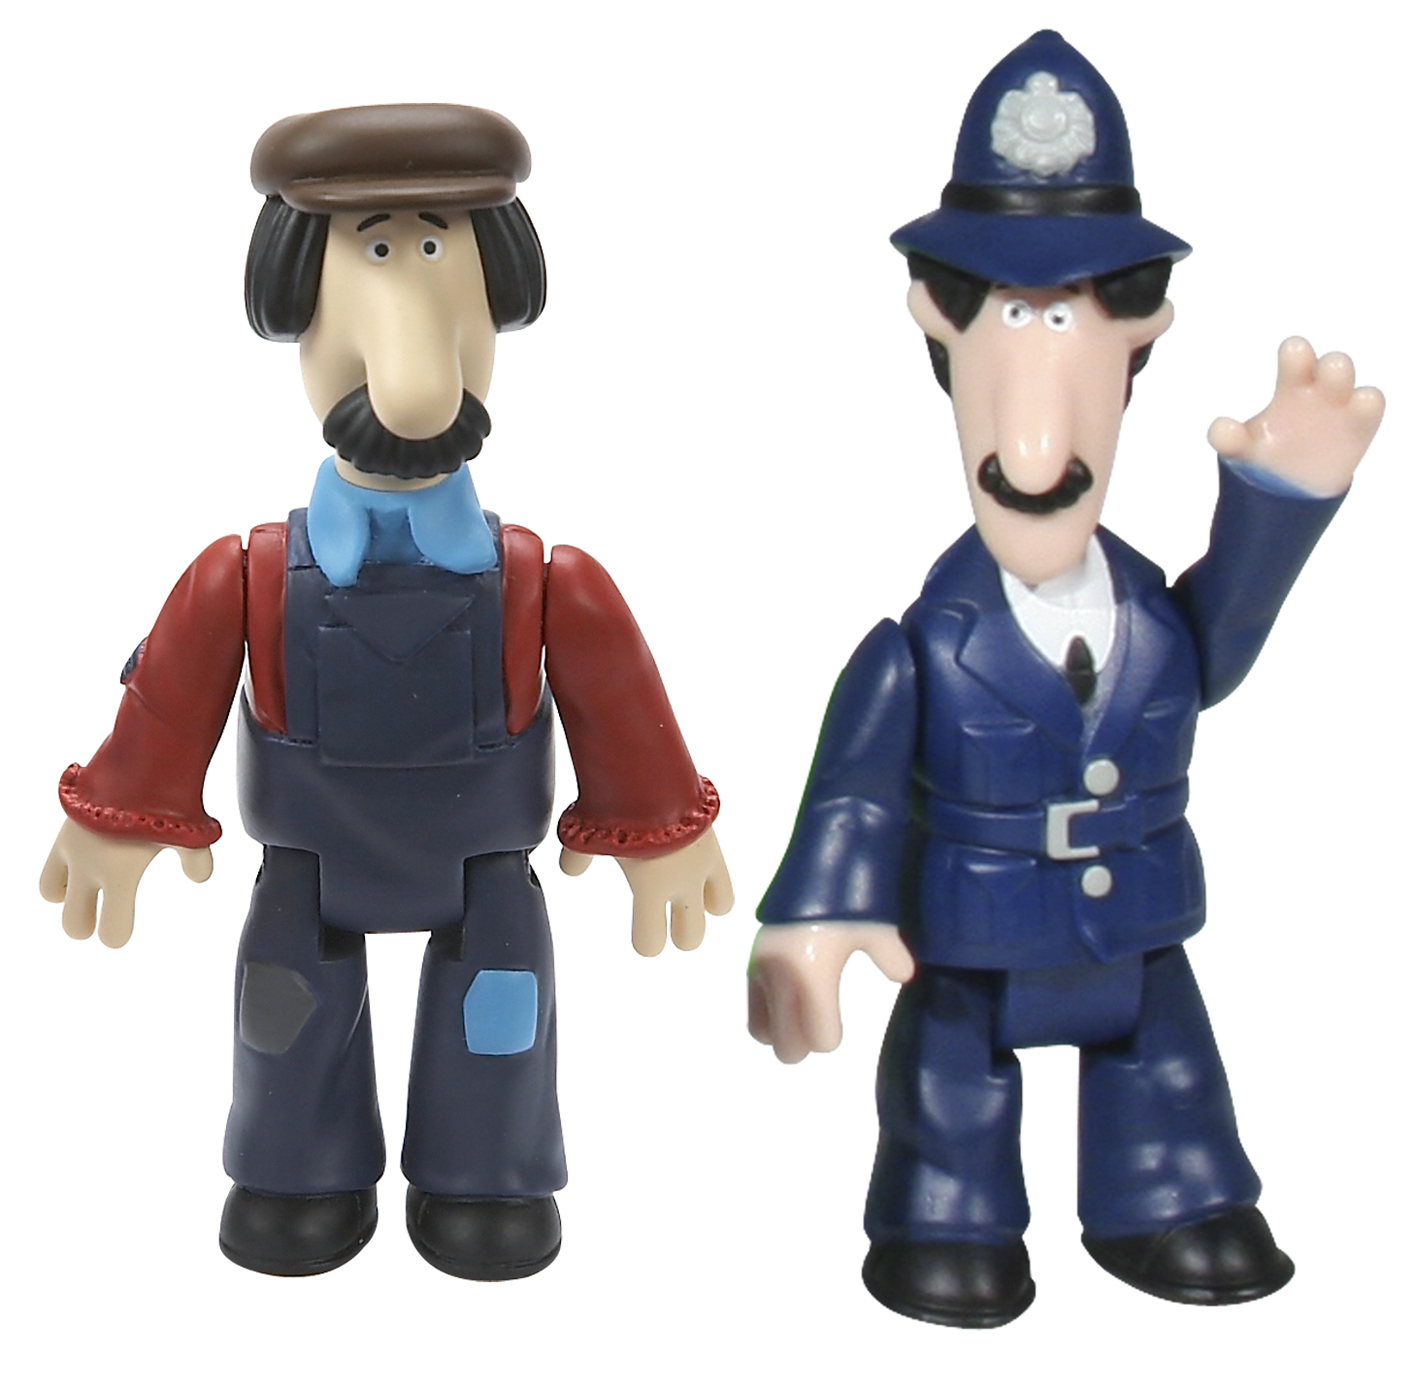 Postman PAt 2 Figure Pack - P.c. Selby and Ted Gle